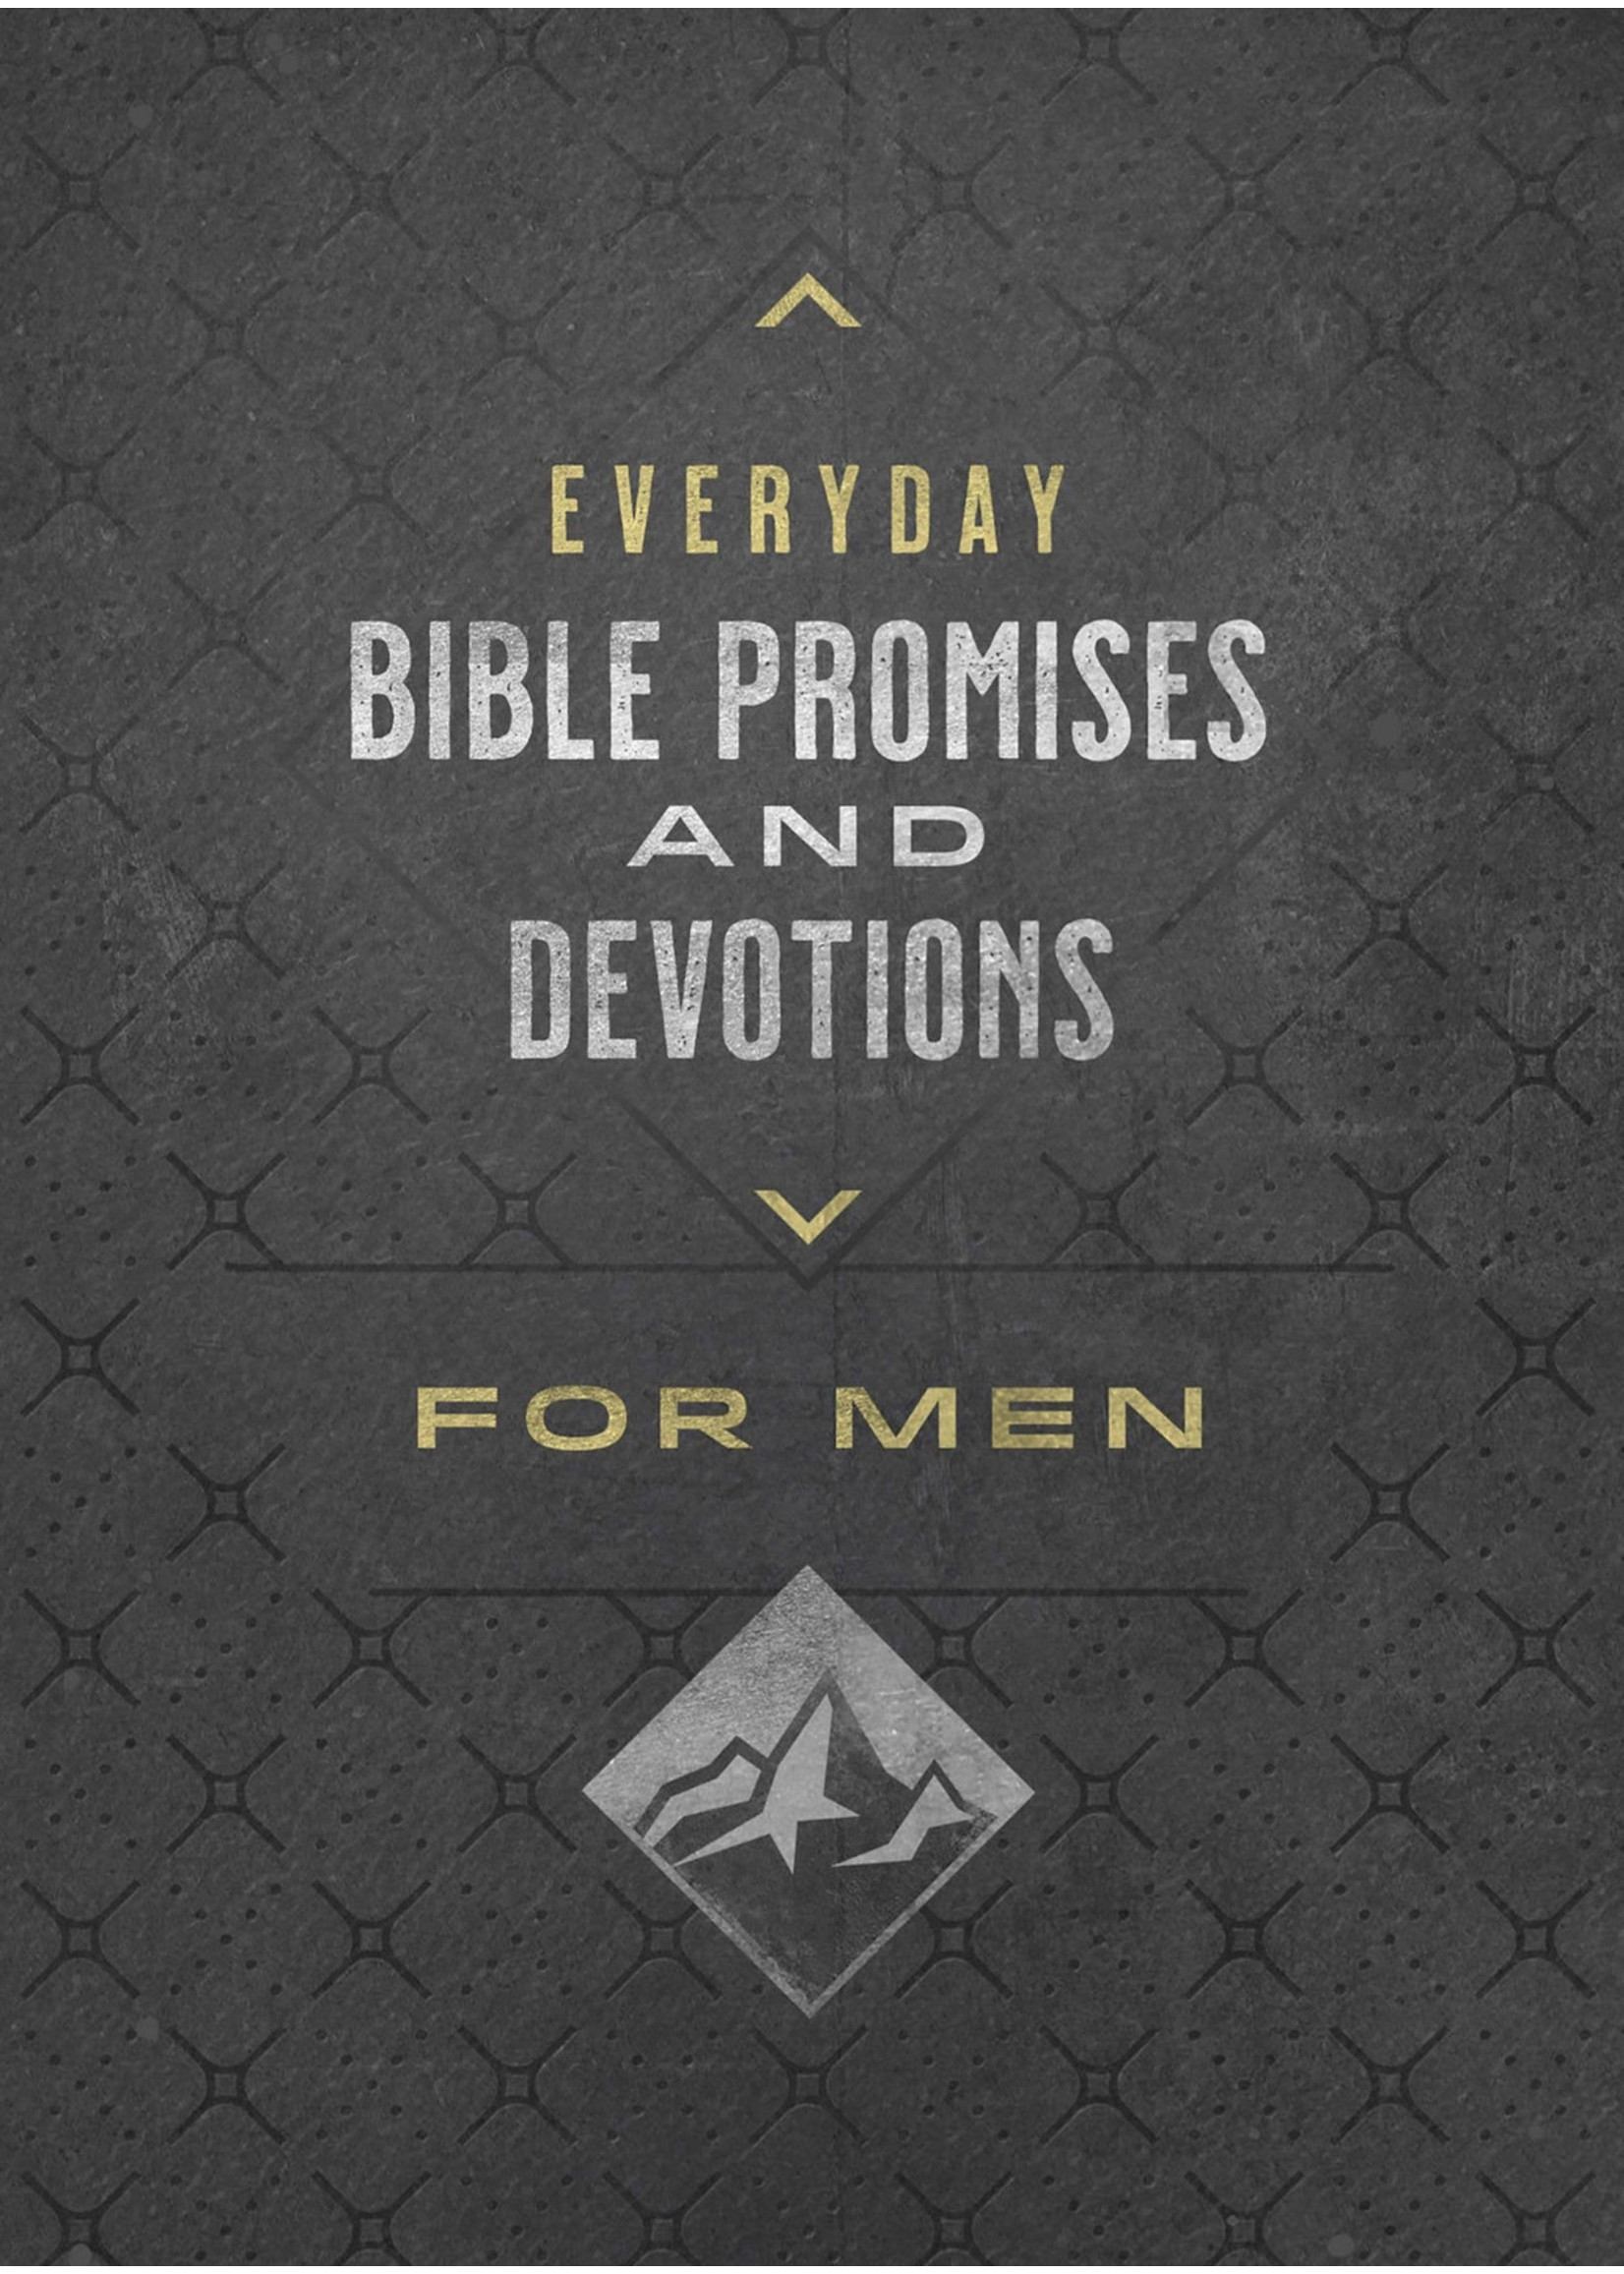 Barbour Publishing Everyday Bible Promises and Devotions for Men